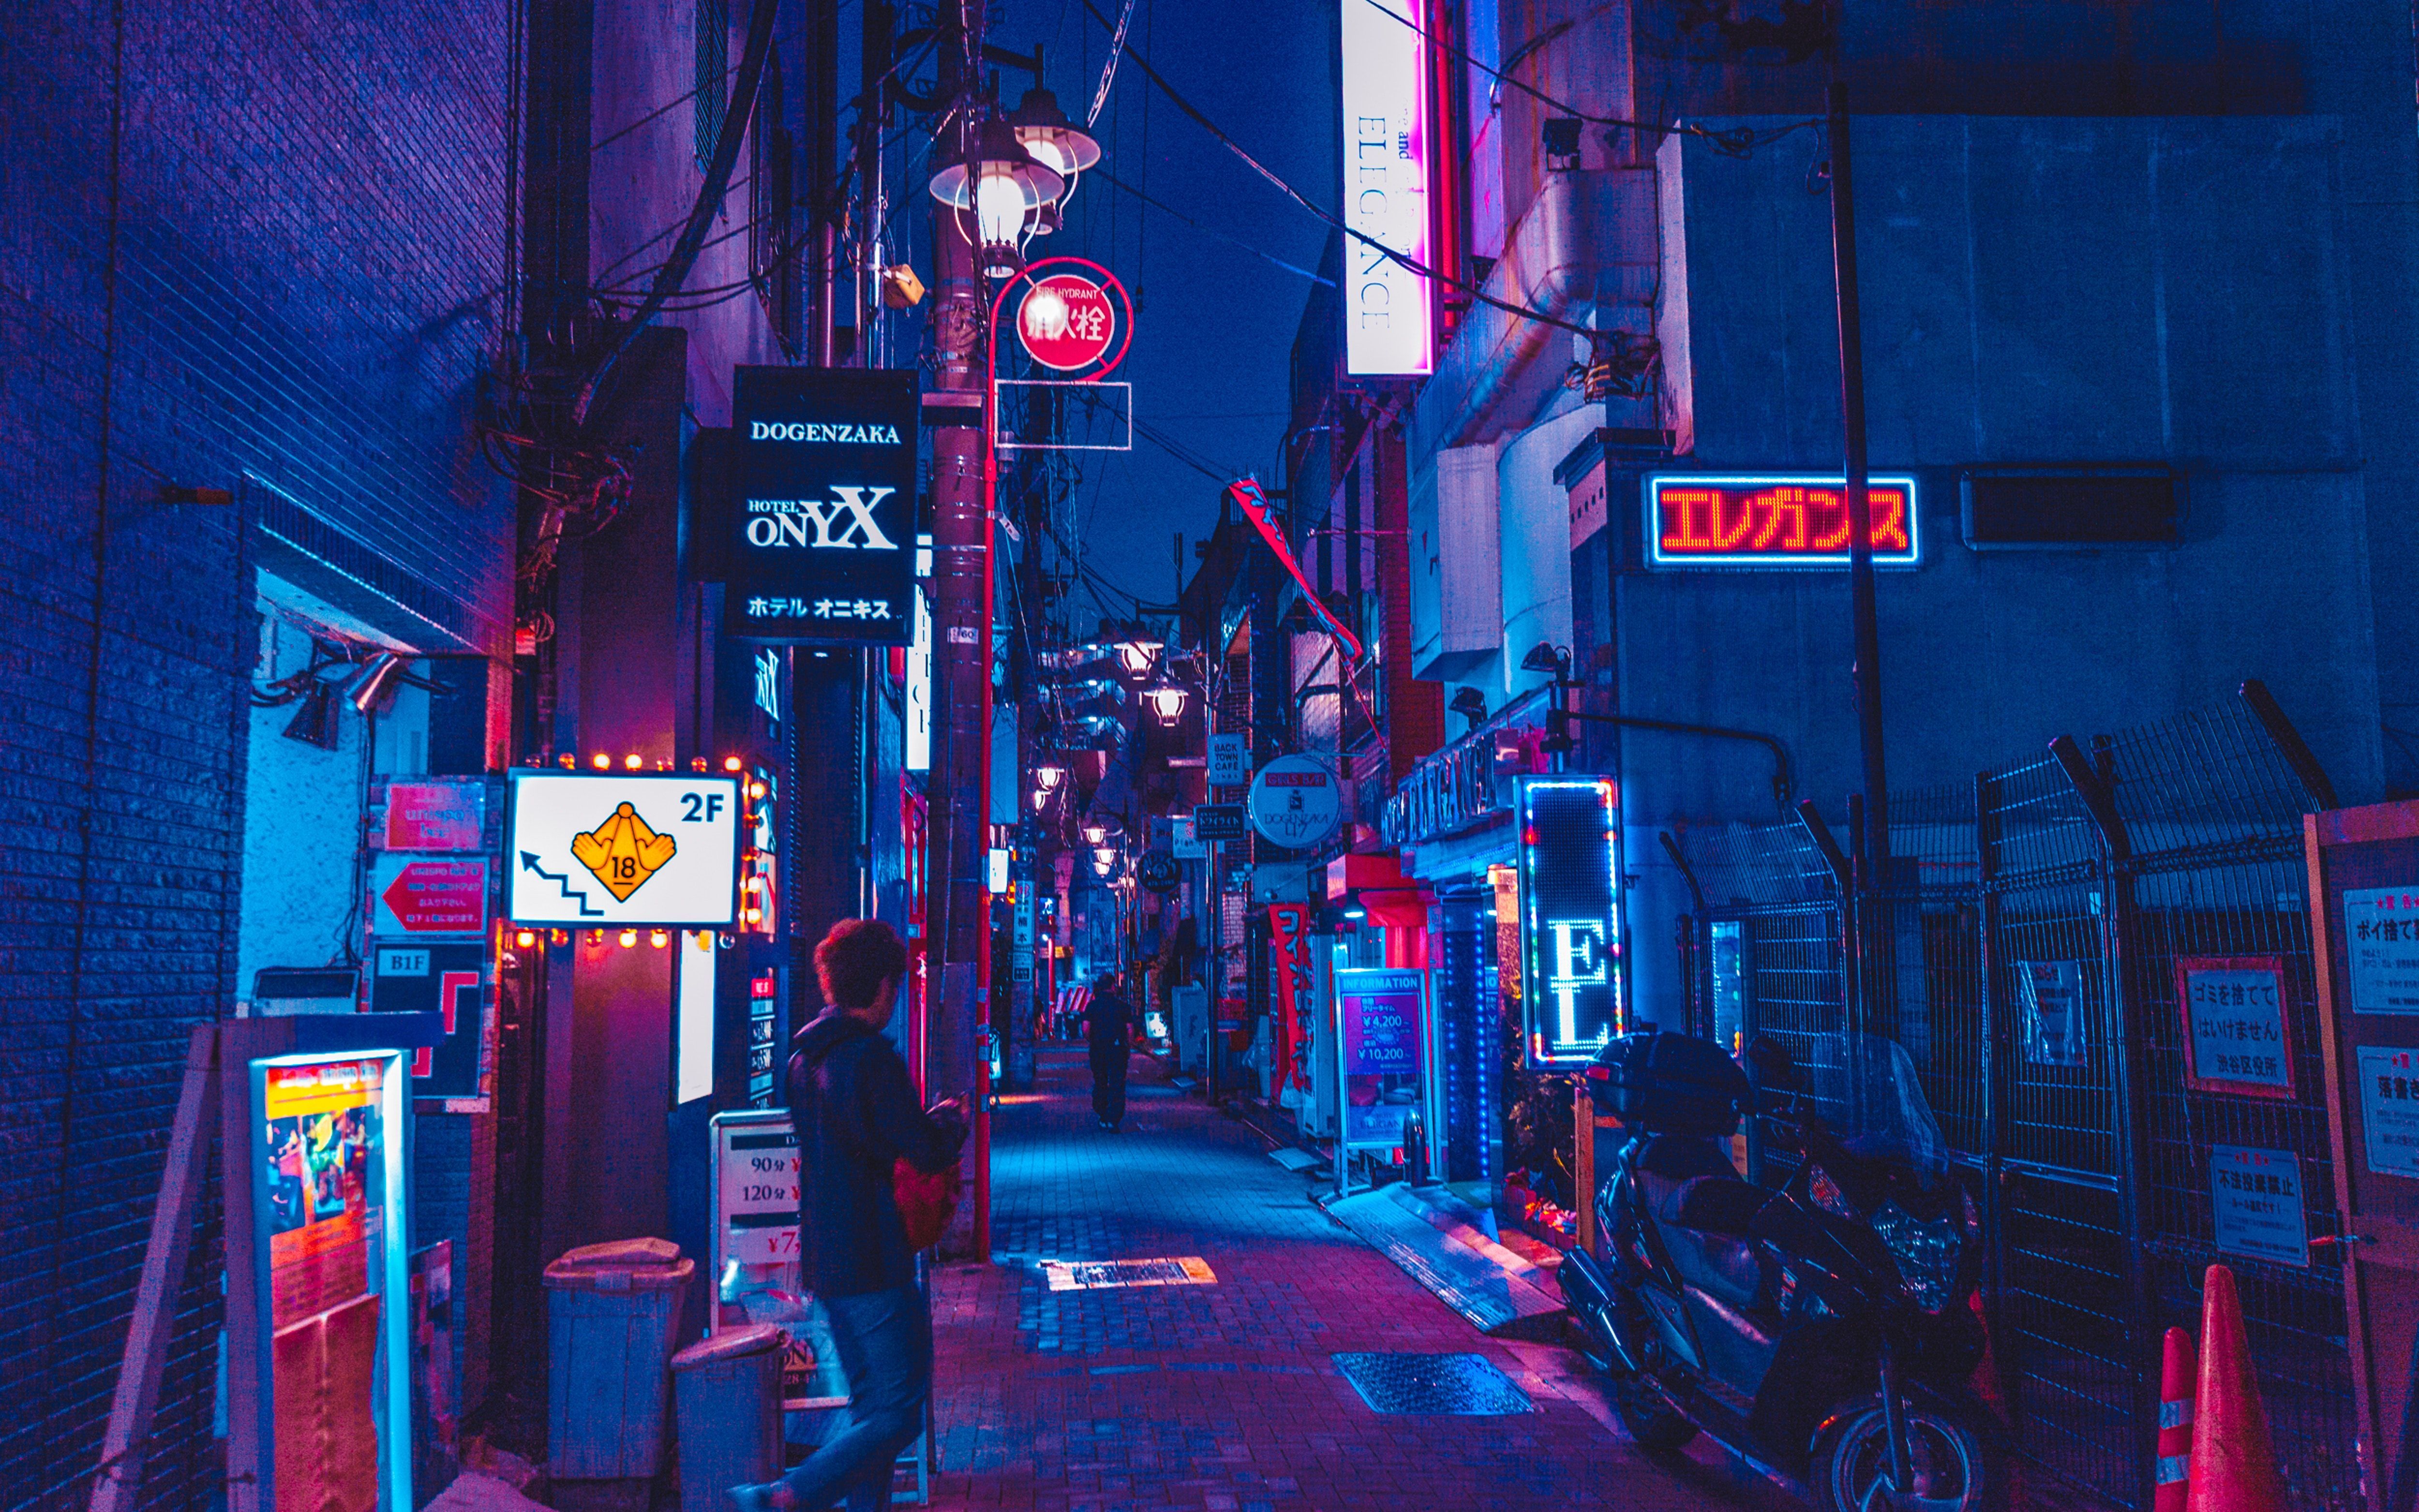 Alleyway, neon light, shop signs and alley HD photo by Benjamin Hung. Alleyway, Wisata jepang, Neon